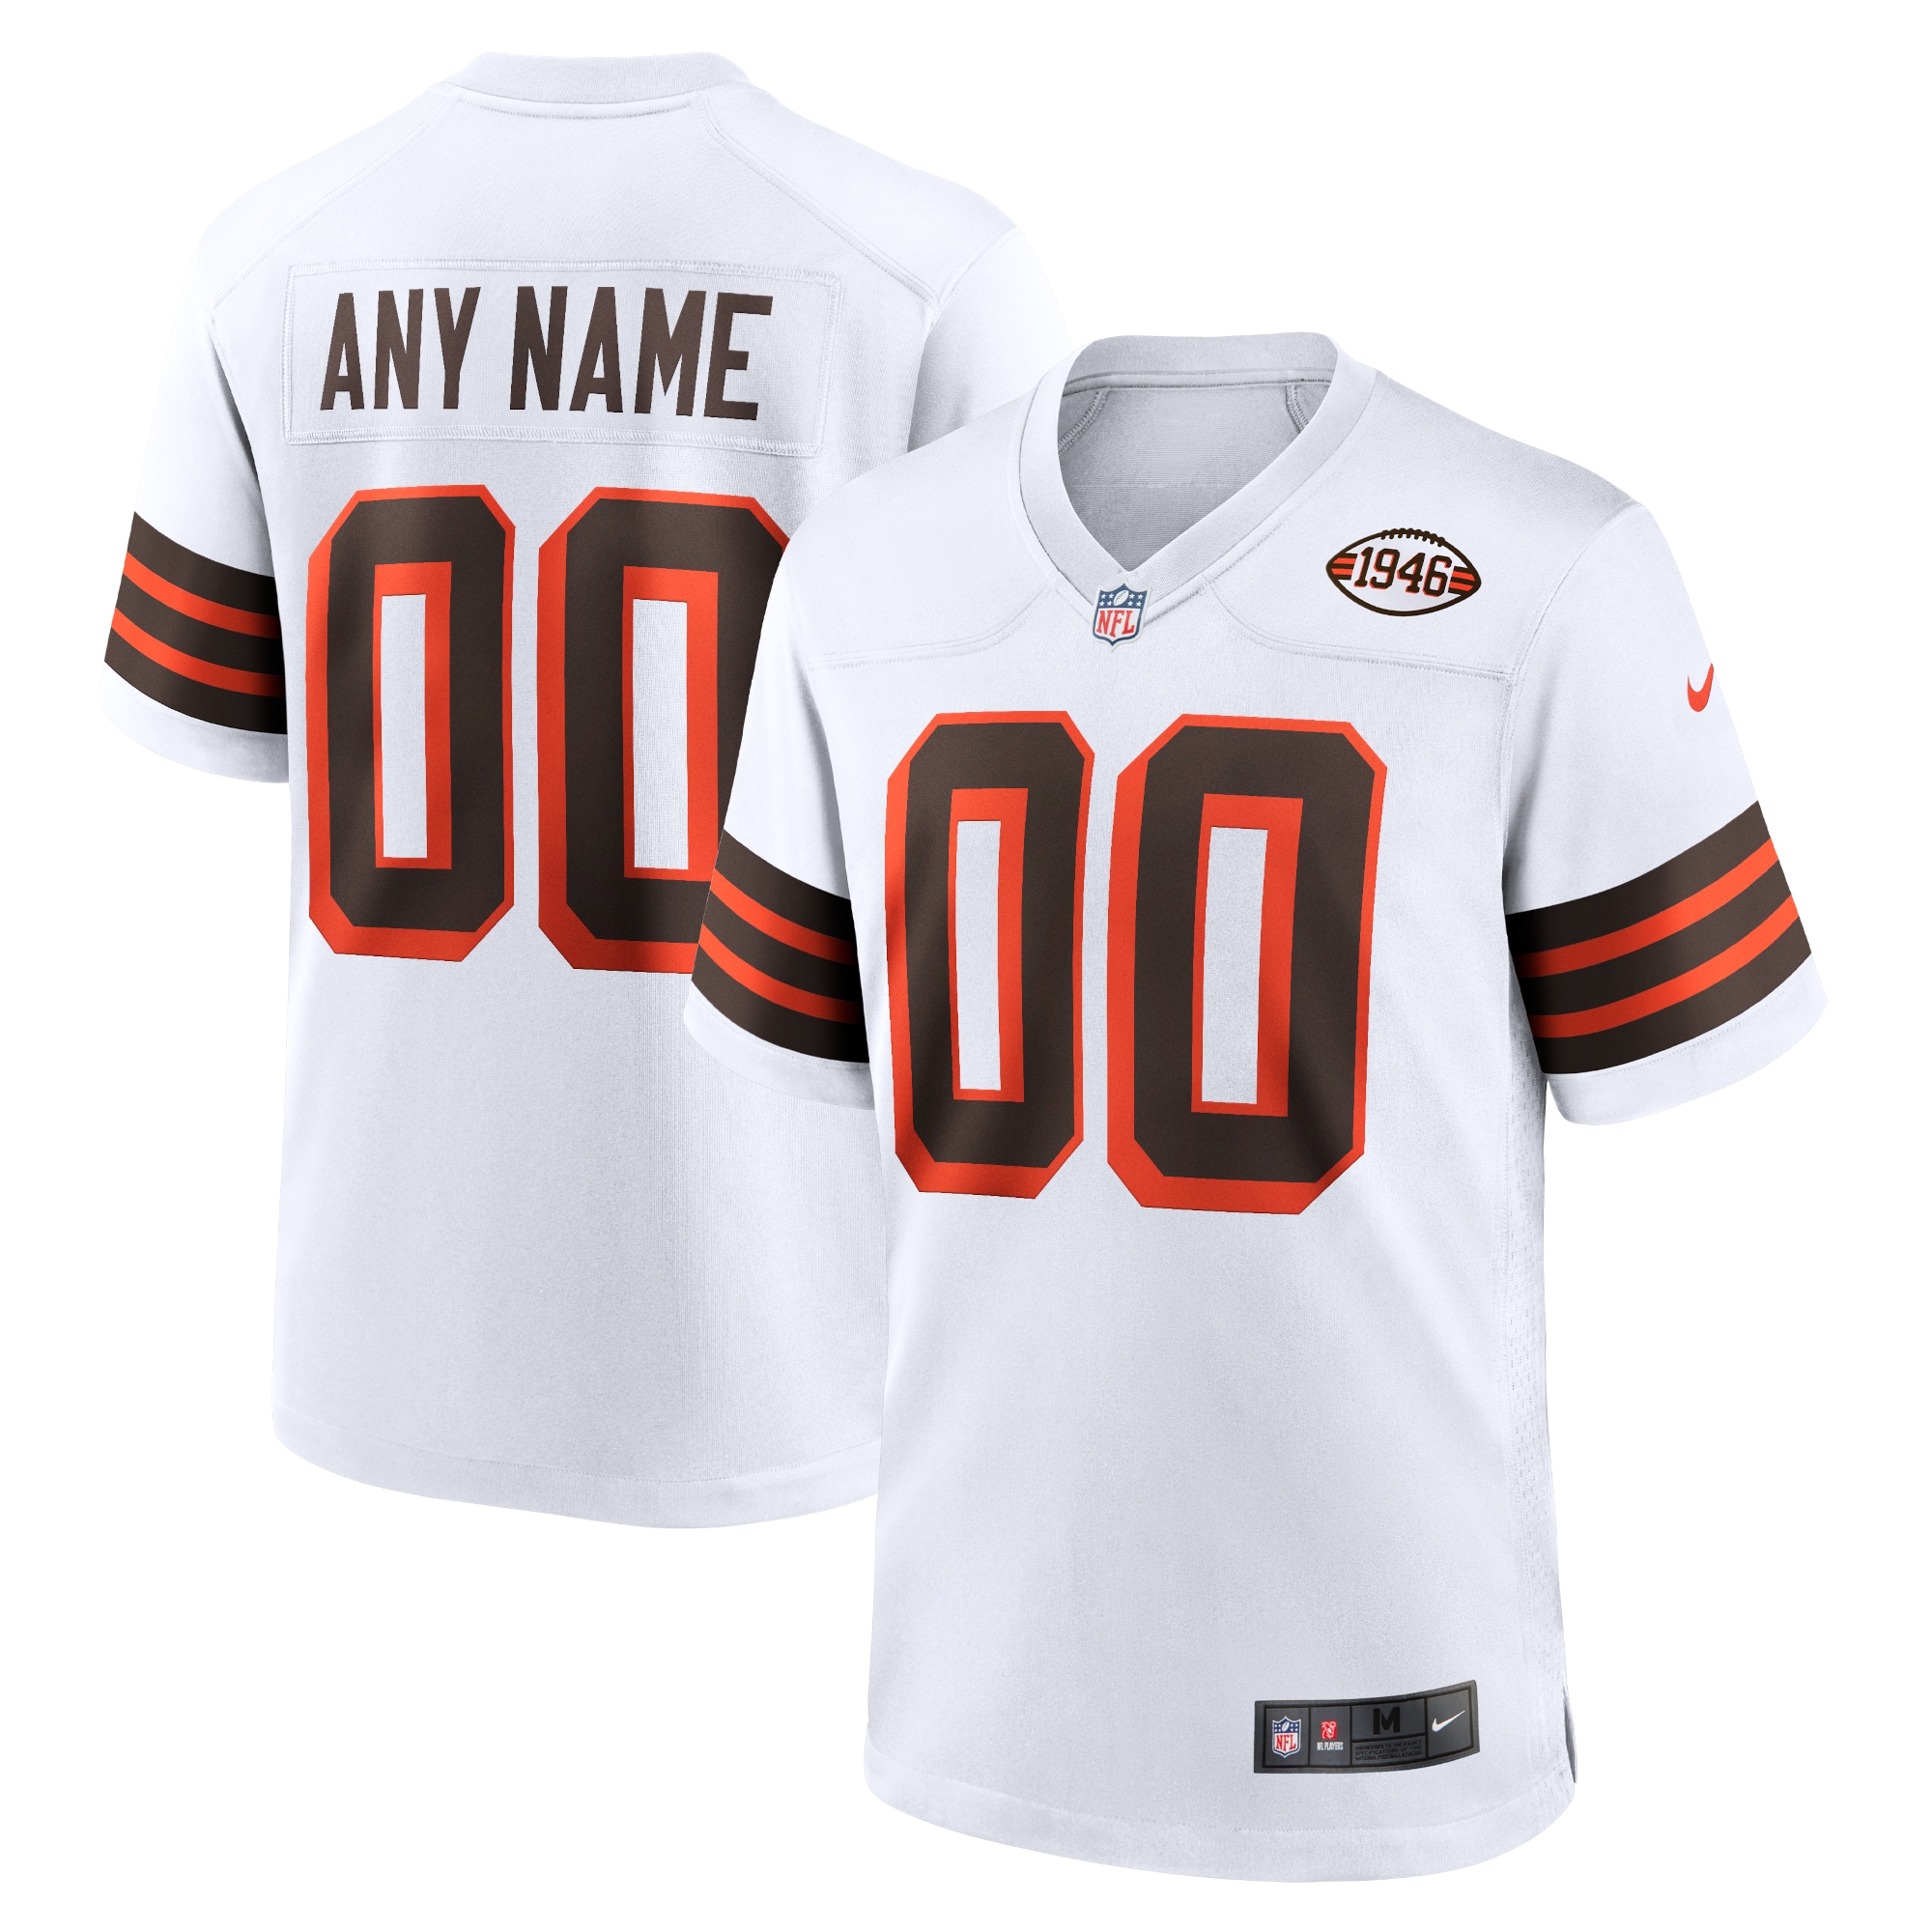 Men’s Cleveland Browns White 1946 Collection Alternate Custom Jersey ...